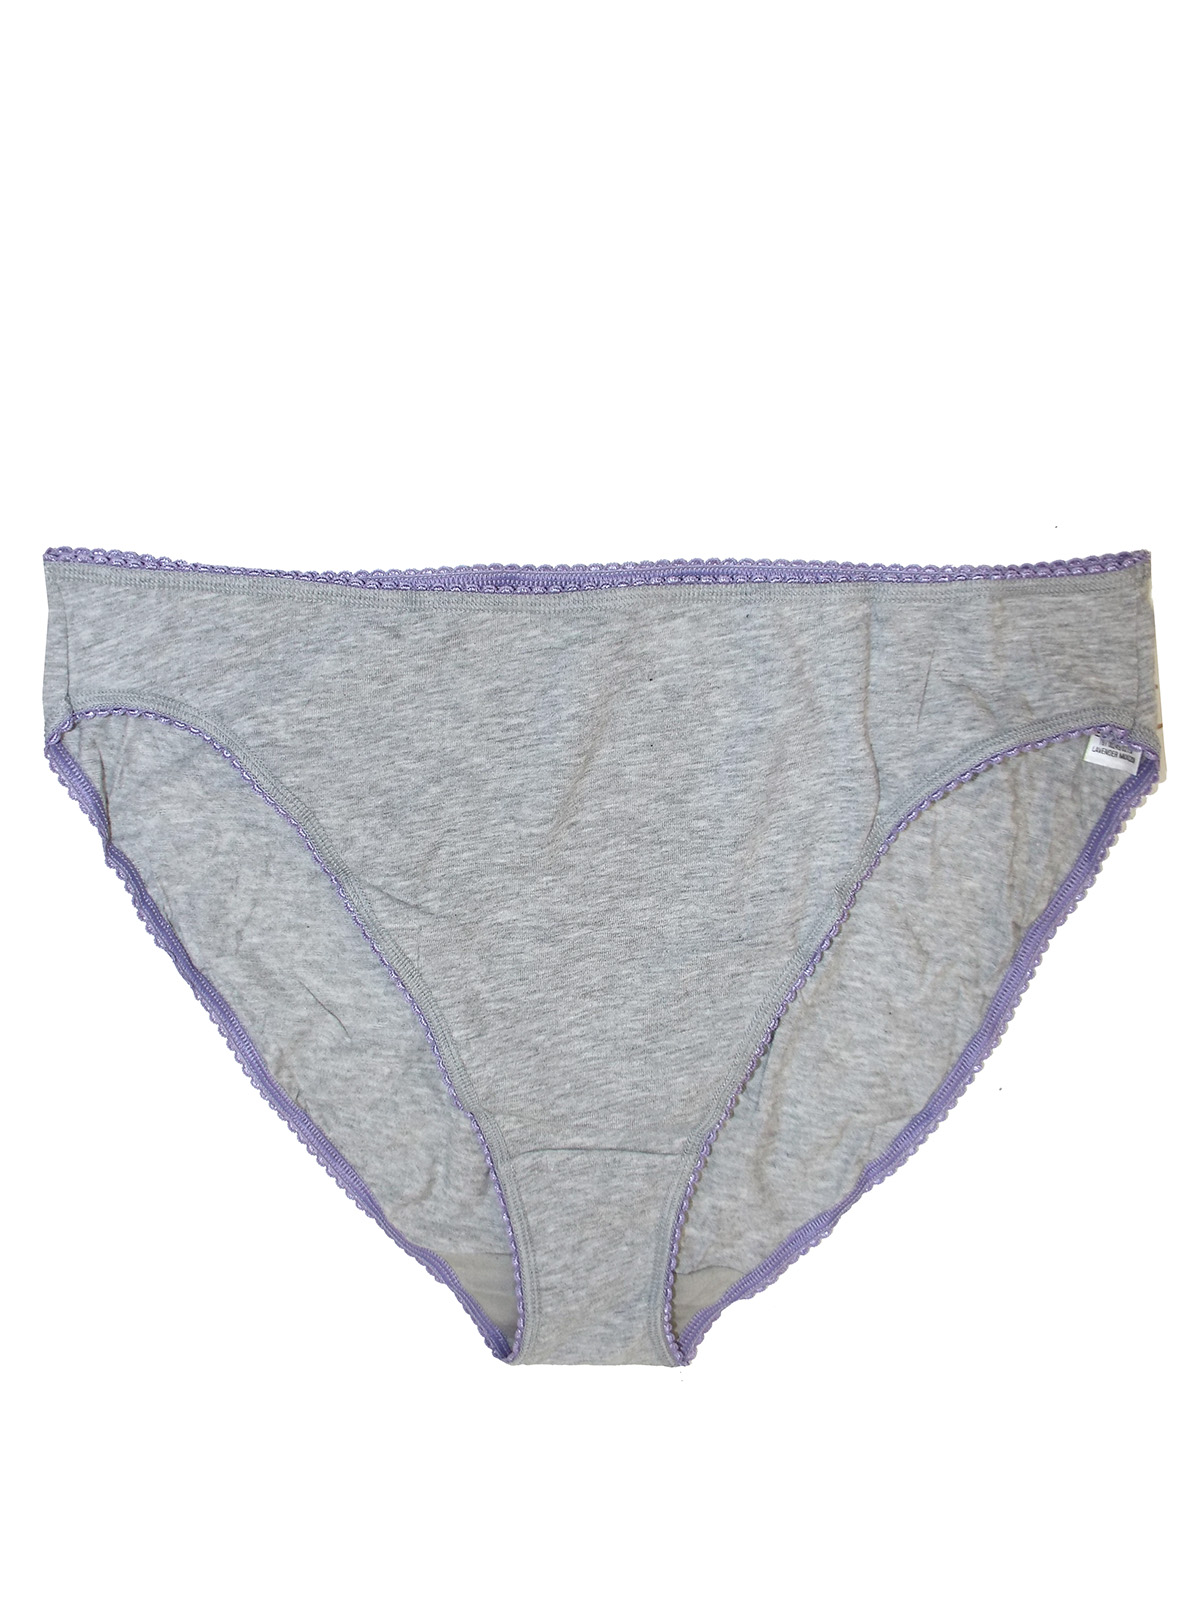 Marks and Spencer - - M&5 GREY Cotton Rich High Leg Knickers - Plus ...